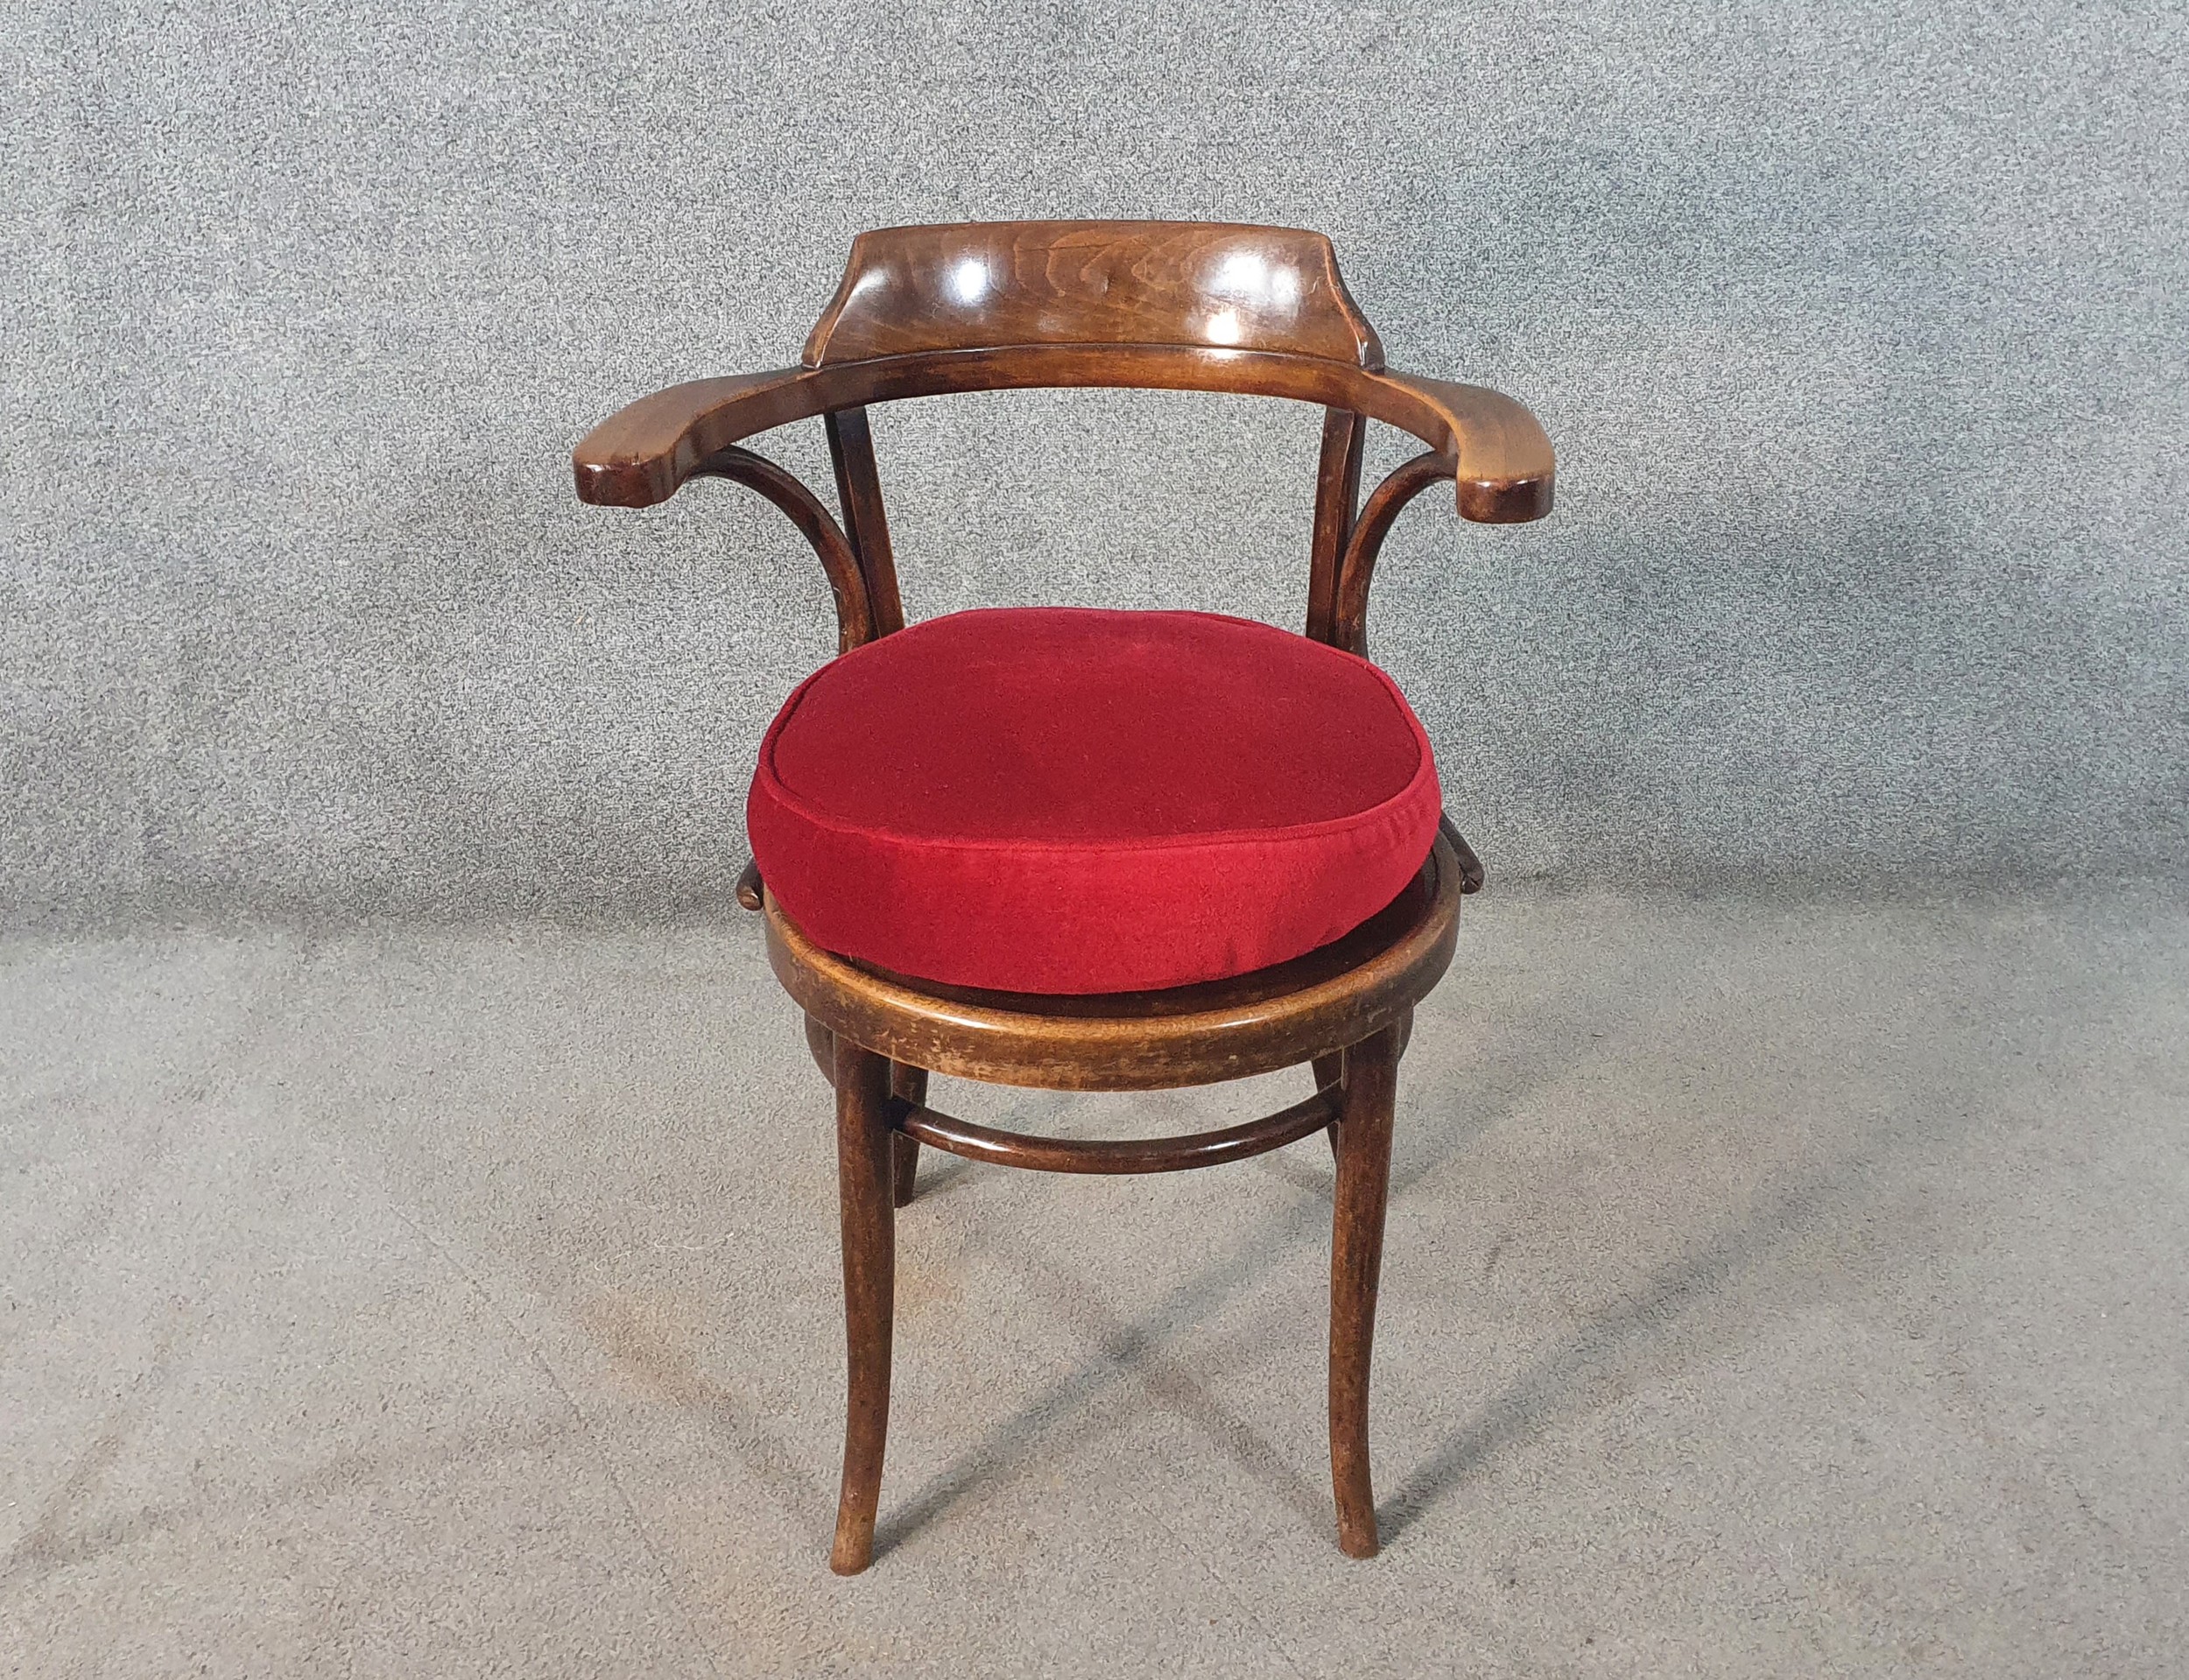 A late 19th/early 20th century Thonet style bentwood open armchair, with a circular pokerwork seat - Image 2 of 8